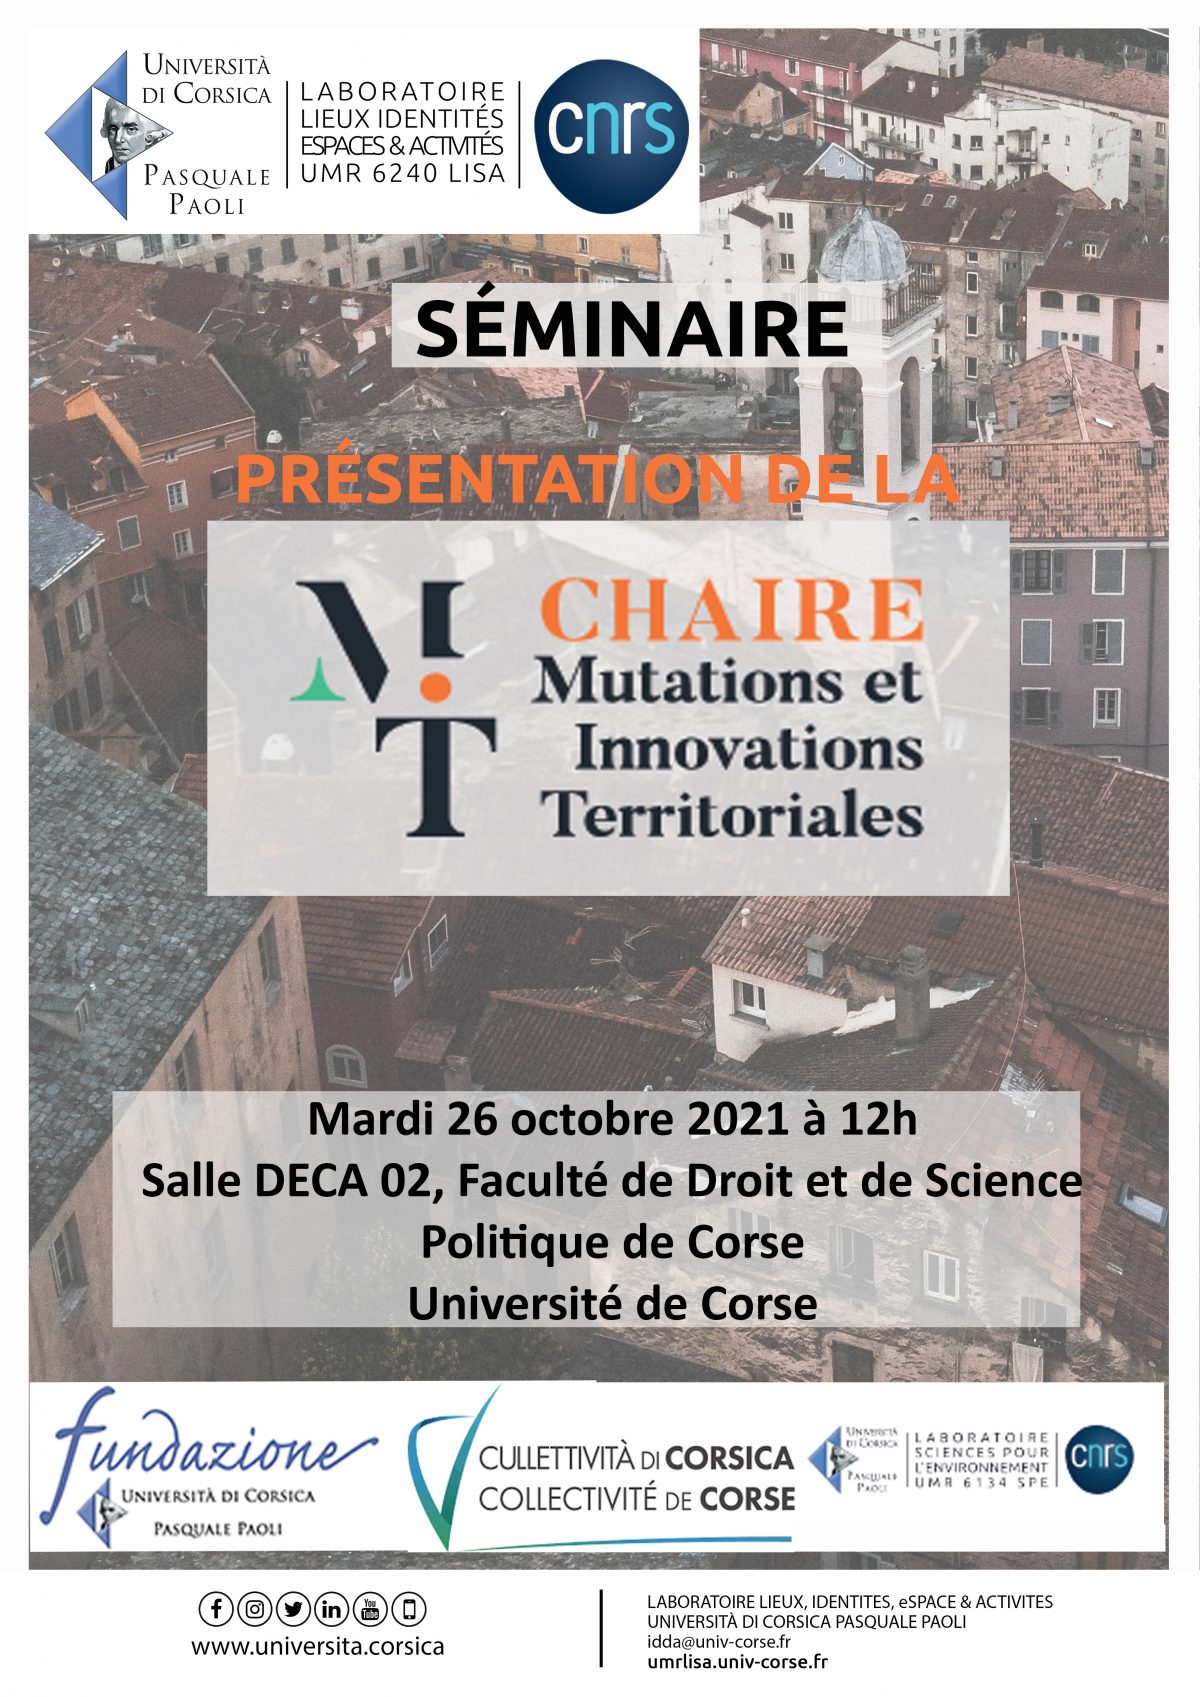 Chaire Mutations et Innovations Territoriales